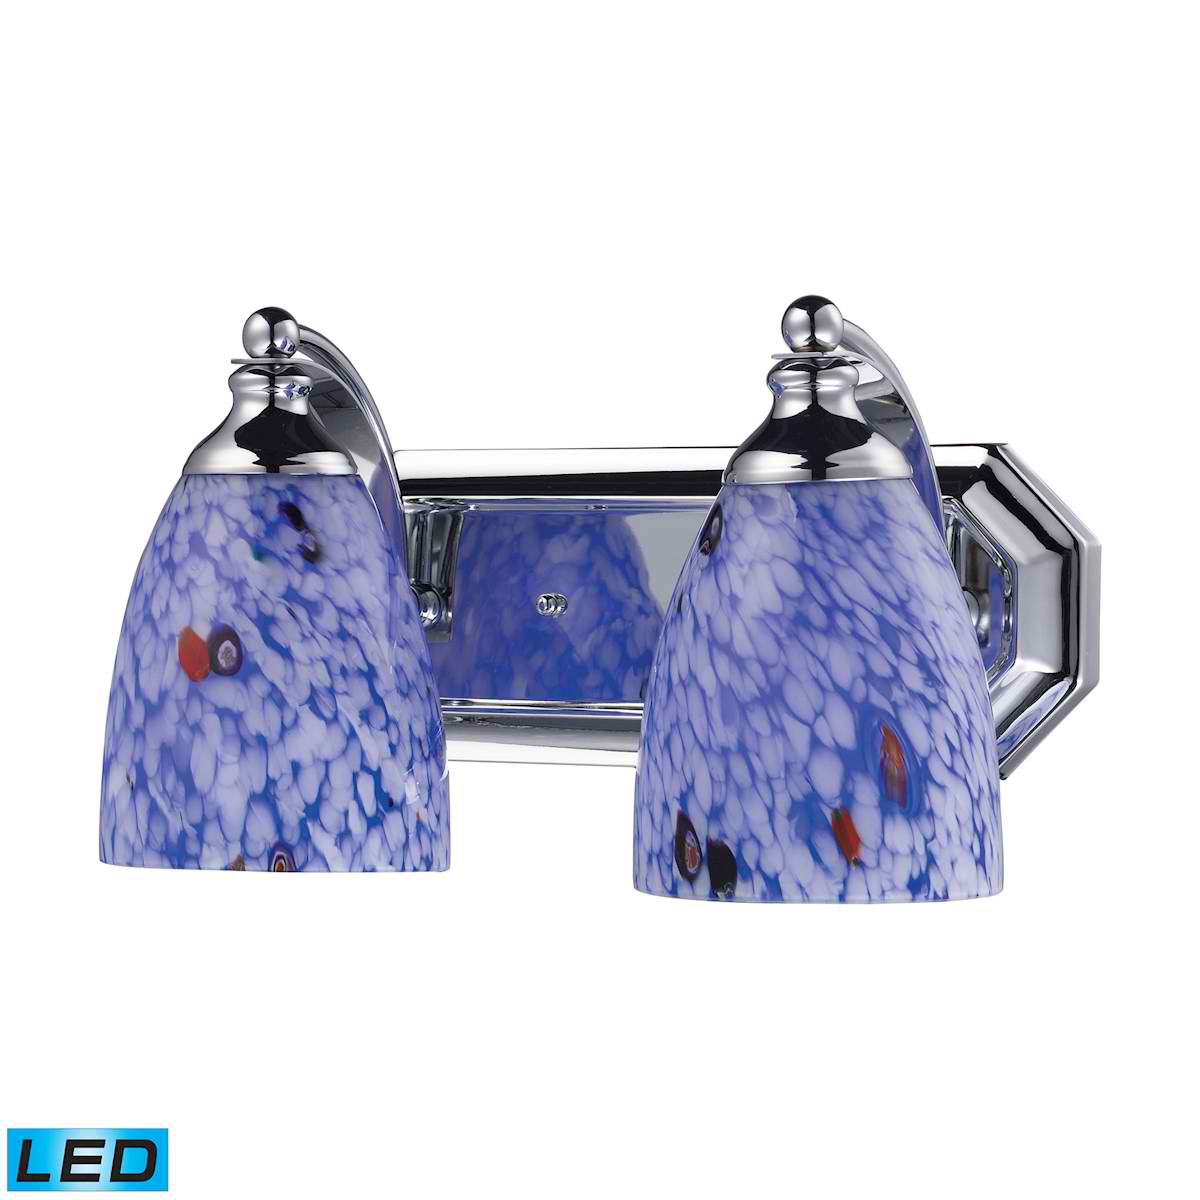 2 Light Vanity in Polished Chrome and Starburst Blue Glass - LED, 800 Lumens (1600 Lumens Total) With Full Scale